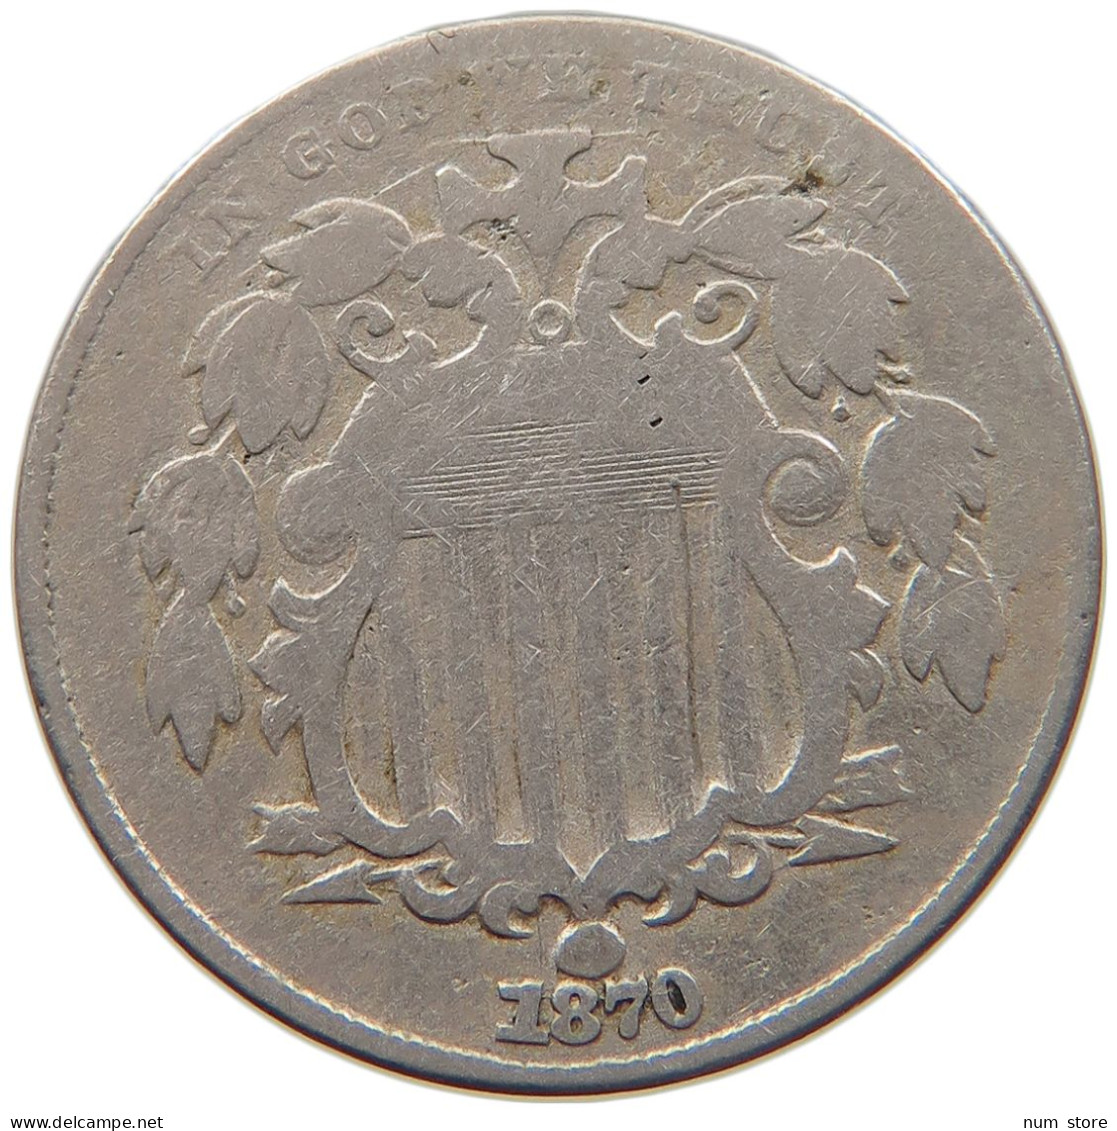 UNITED STATES OF AMERICA NICKEL 1870 #s093 0135 - 1866-83: Shield (Écusson)